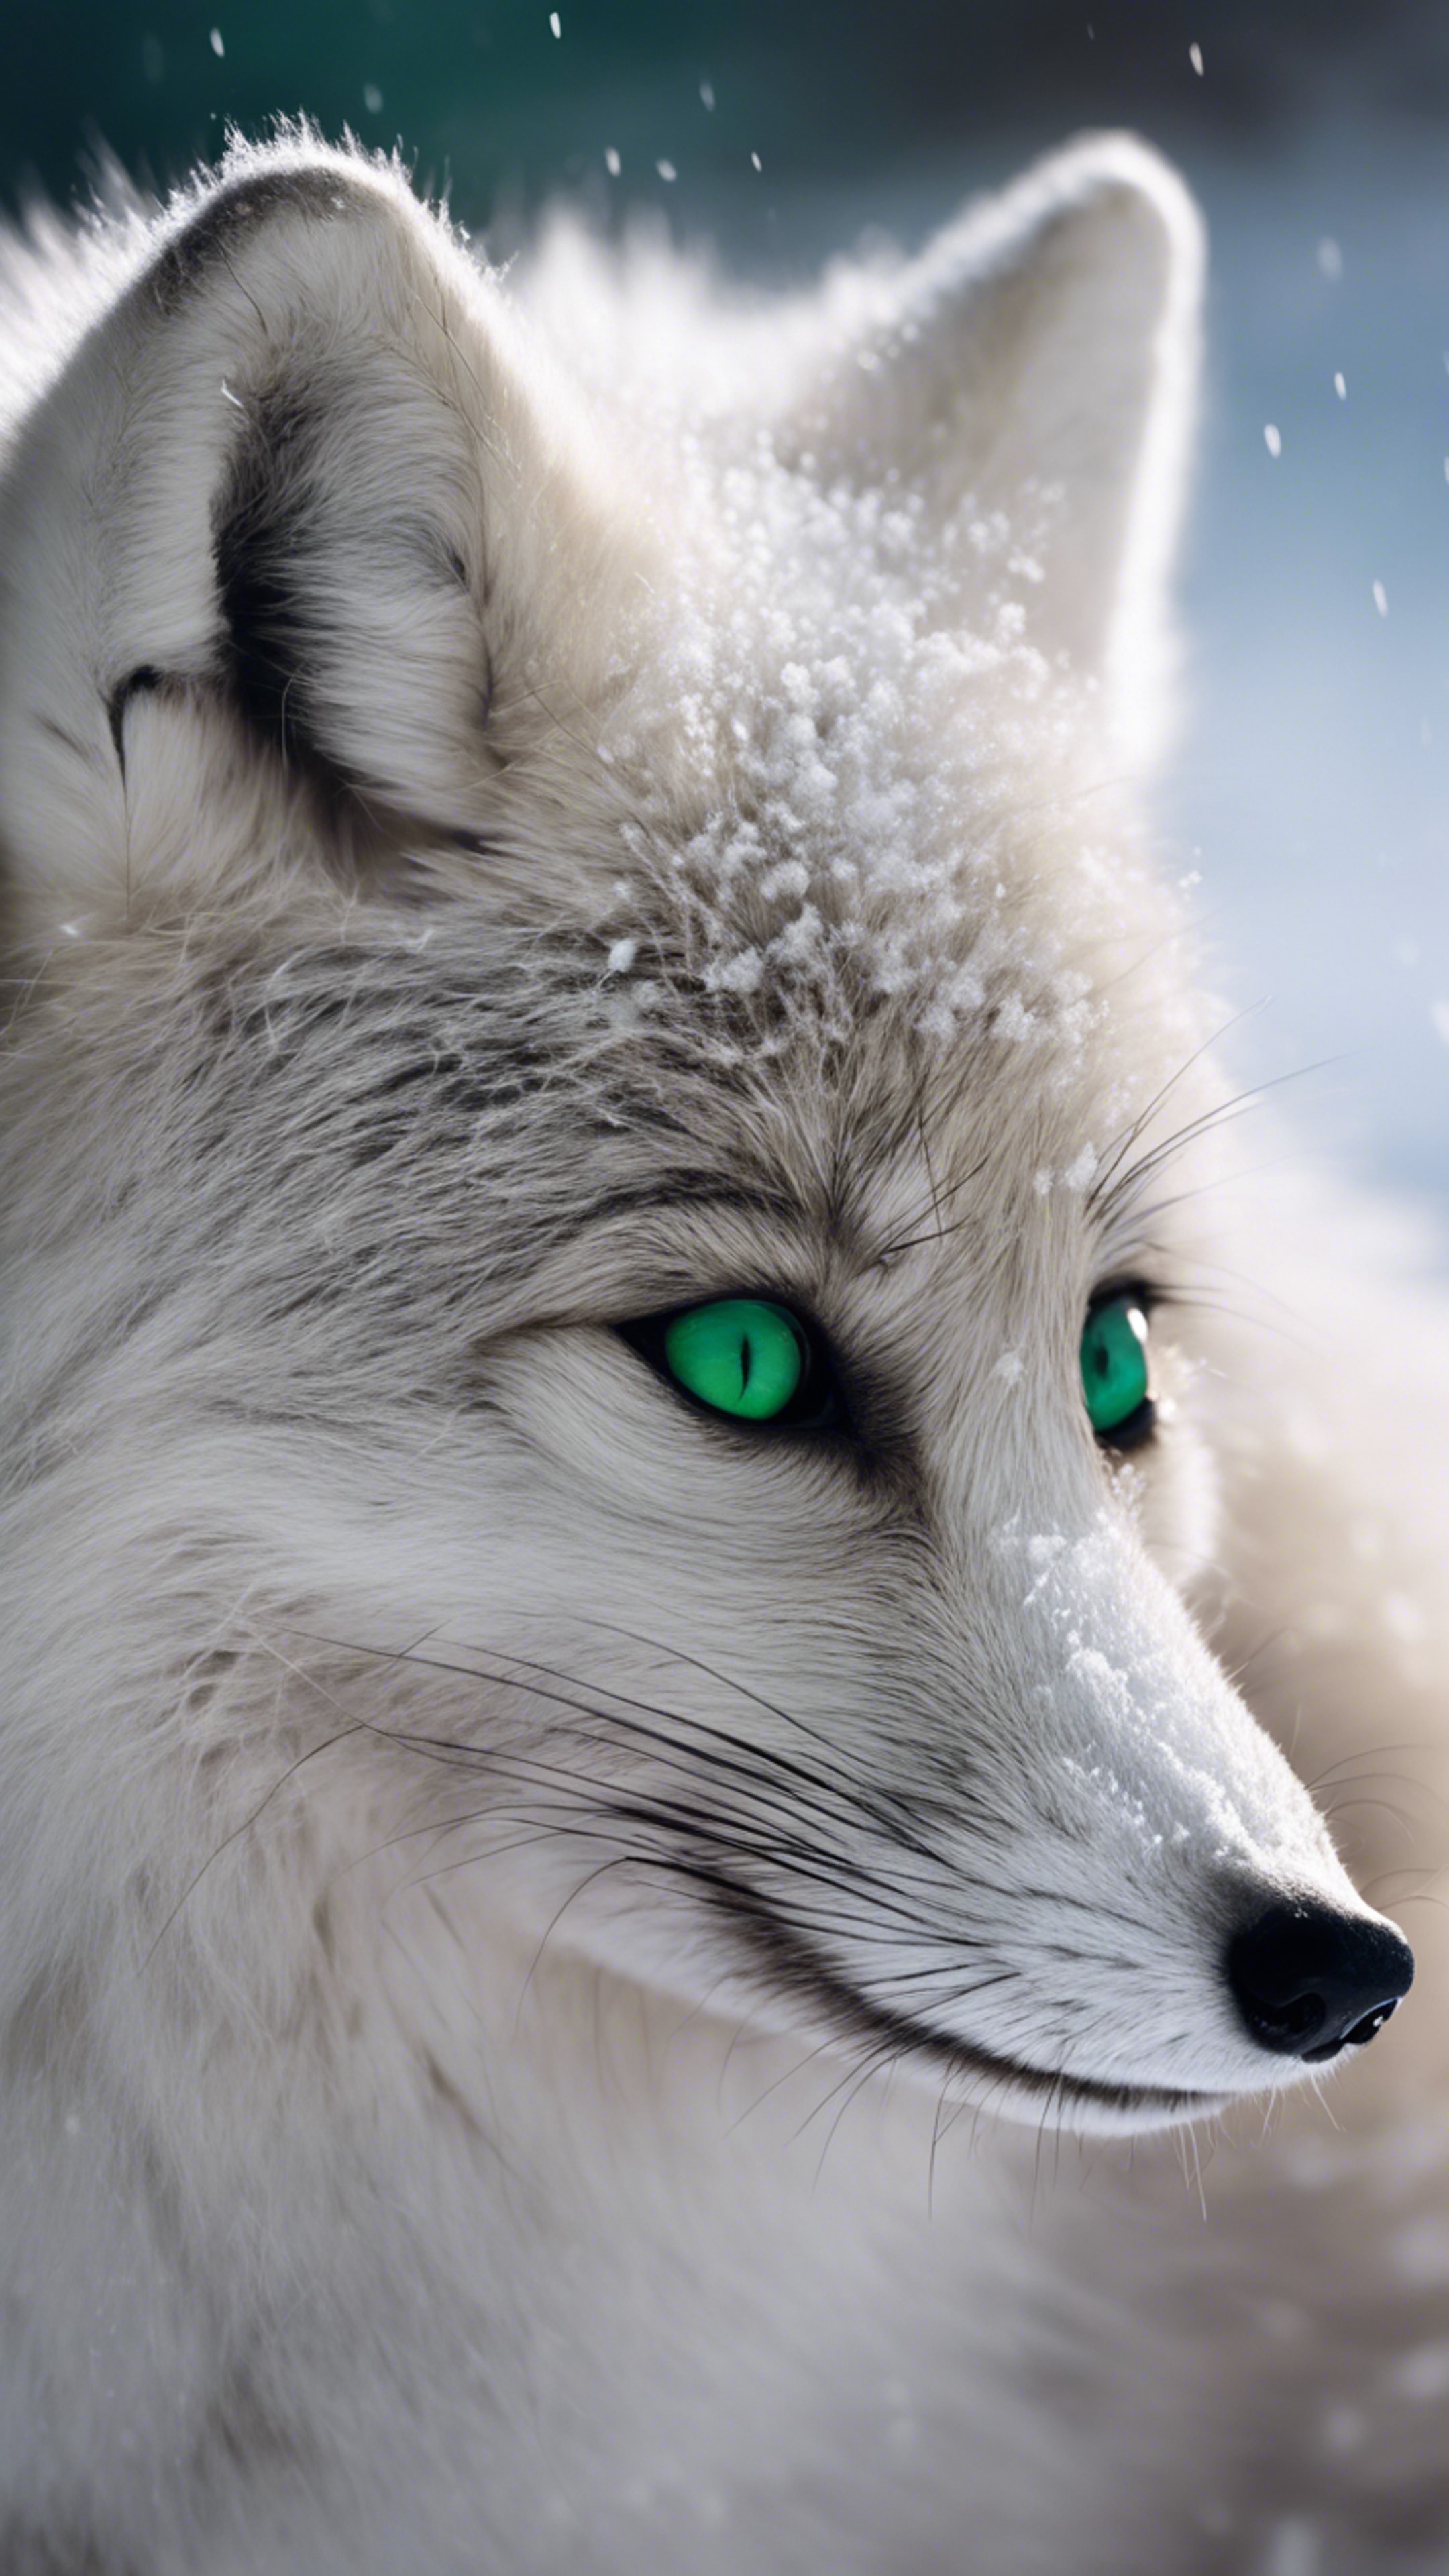 A fluffy, smoky gray arctic fox curled up in a snowy setting, its vivid green eyes staring directly at the viewer. Tapet[a0ededdcc5bf4726bdb5]